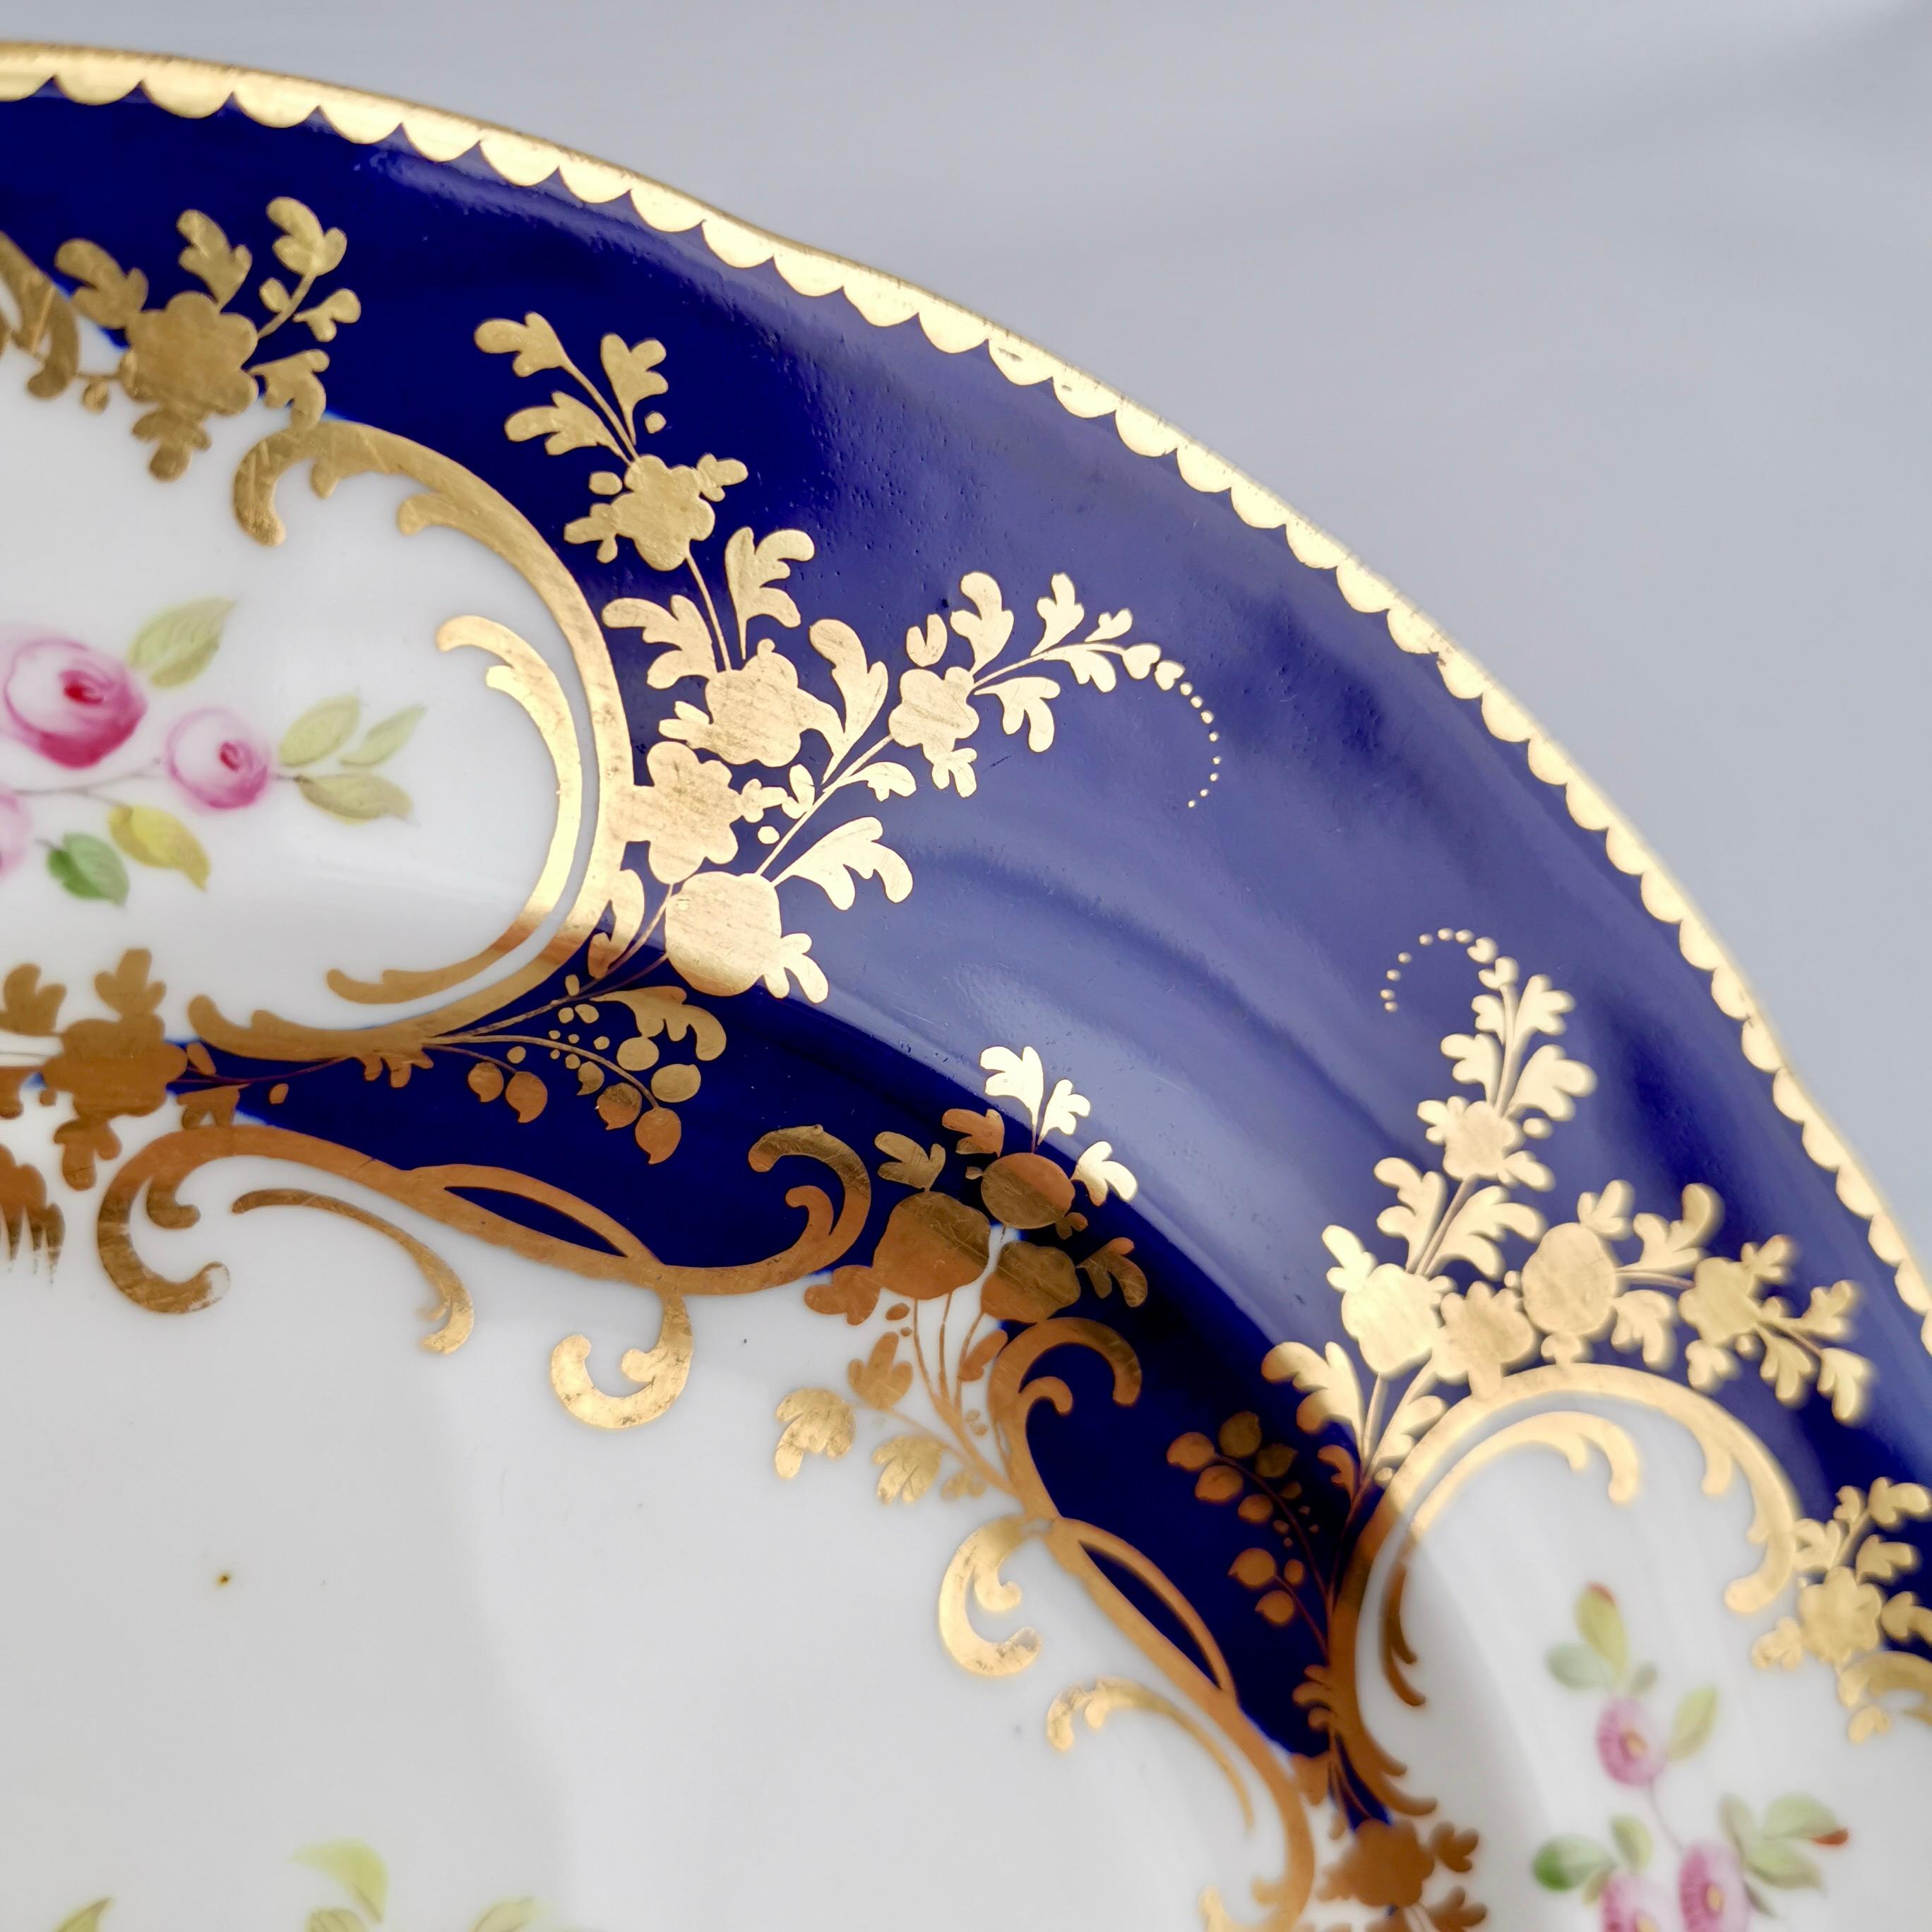 Mid-19th Century Minton Porcelain Plate, Cobalt Blue with Floral Reserves, Victorian ca 1840